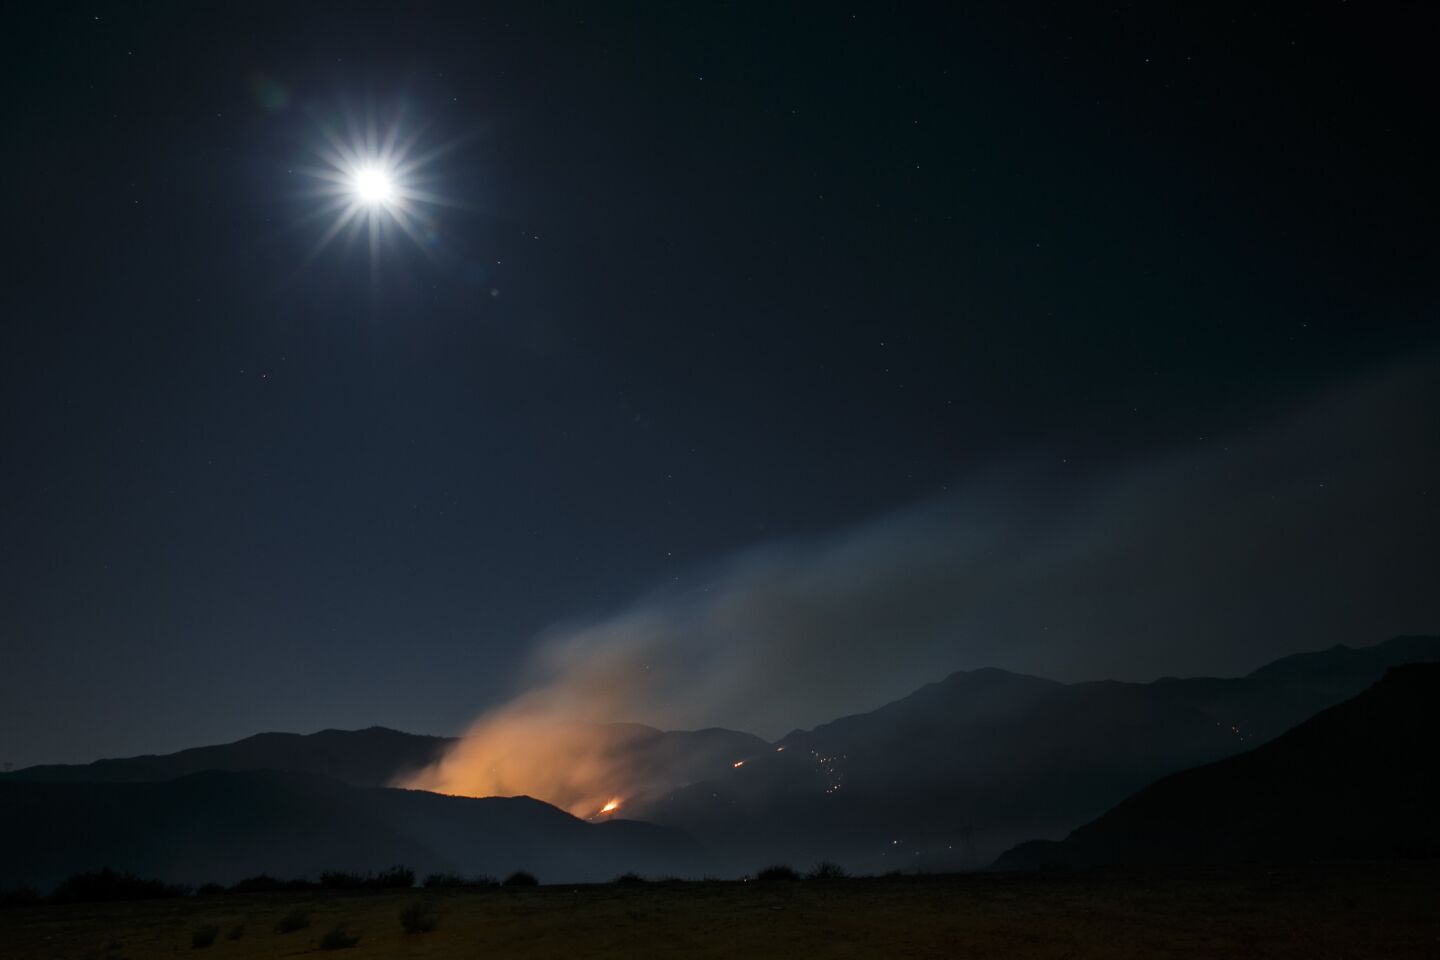 During the night, a portion of the Blue Cut fire burns along Interstate 15.